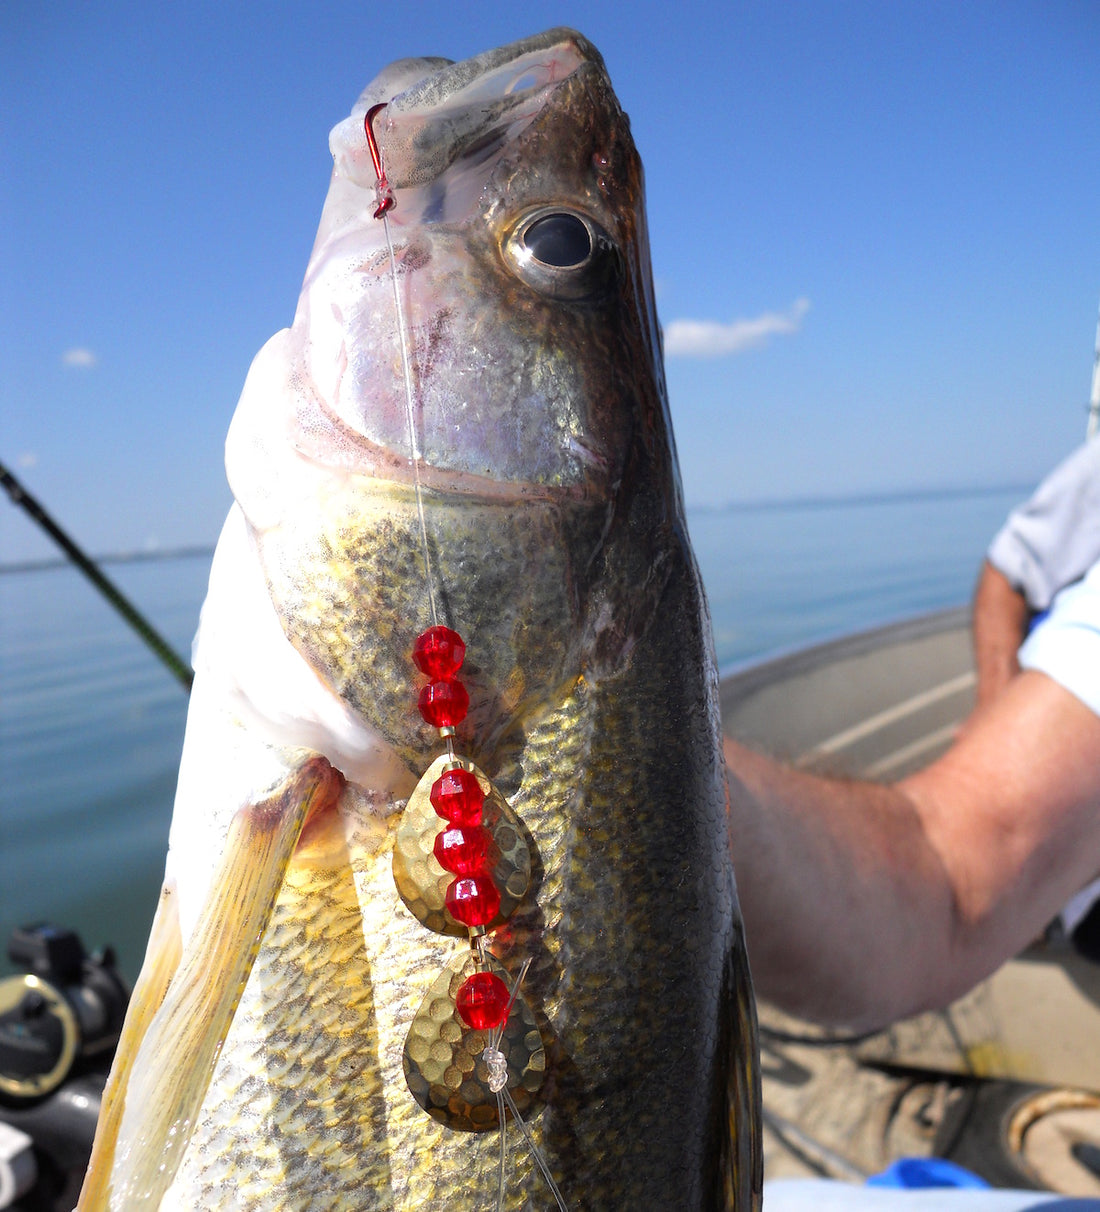 How to Fish Big Lakes from Shore